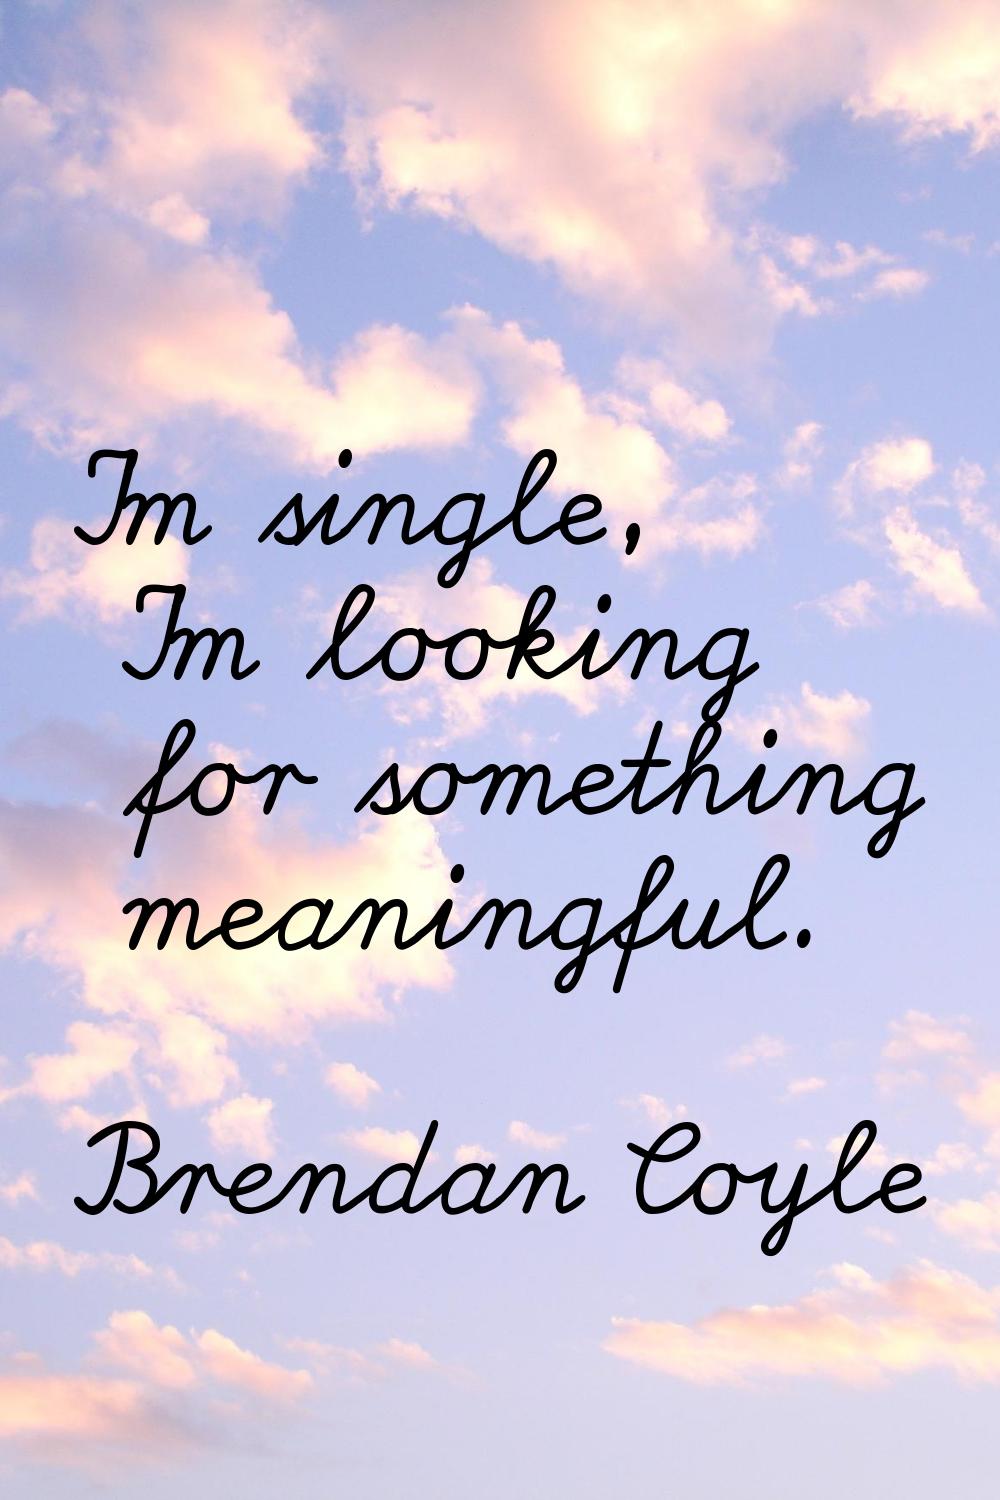 I'm single, I'm looking for something meaningful.